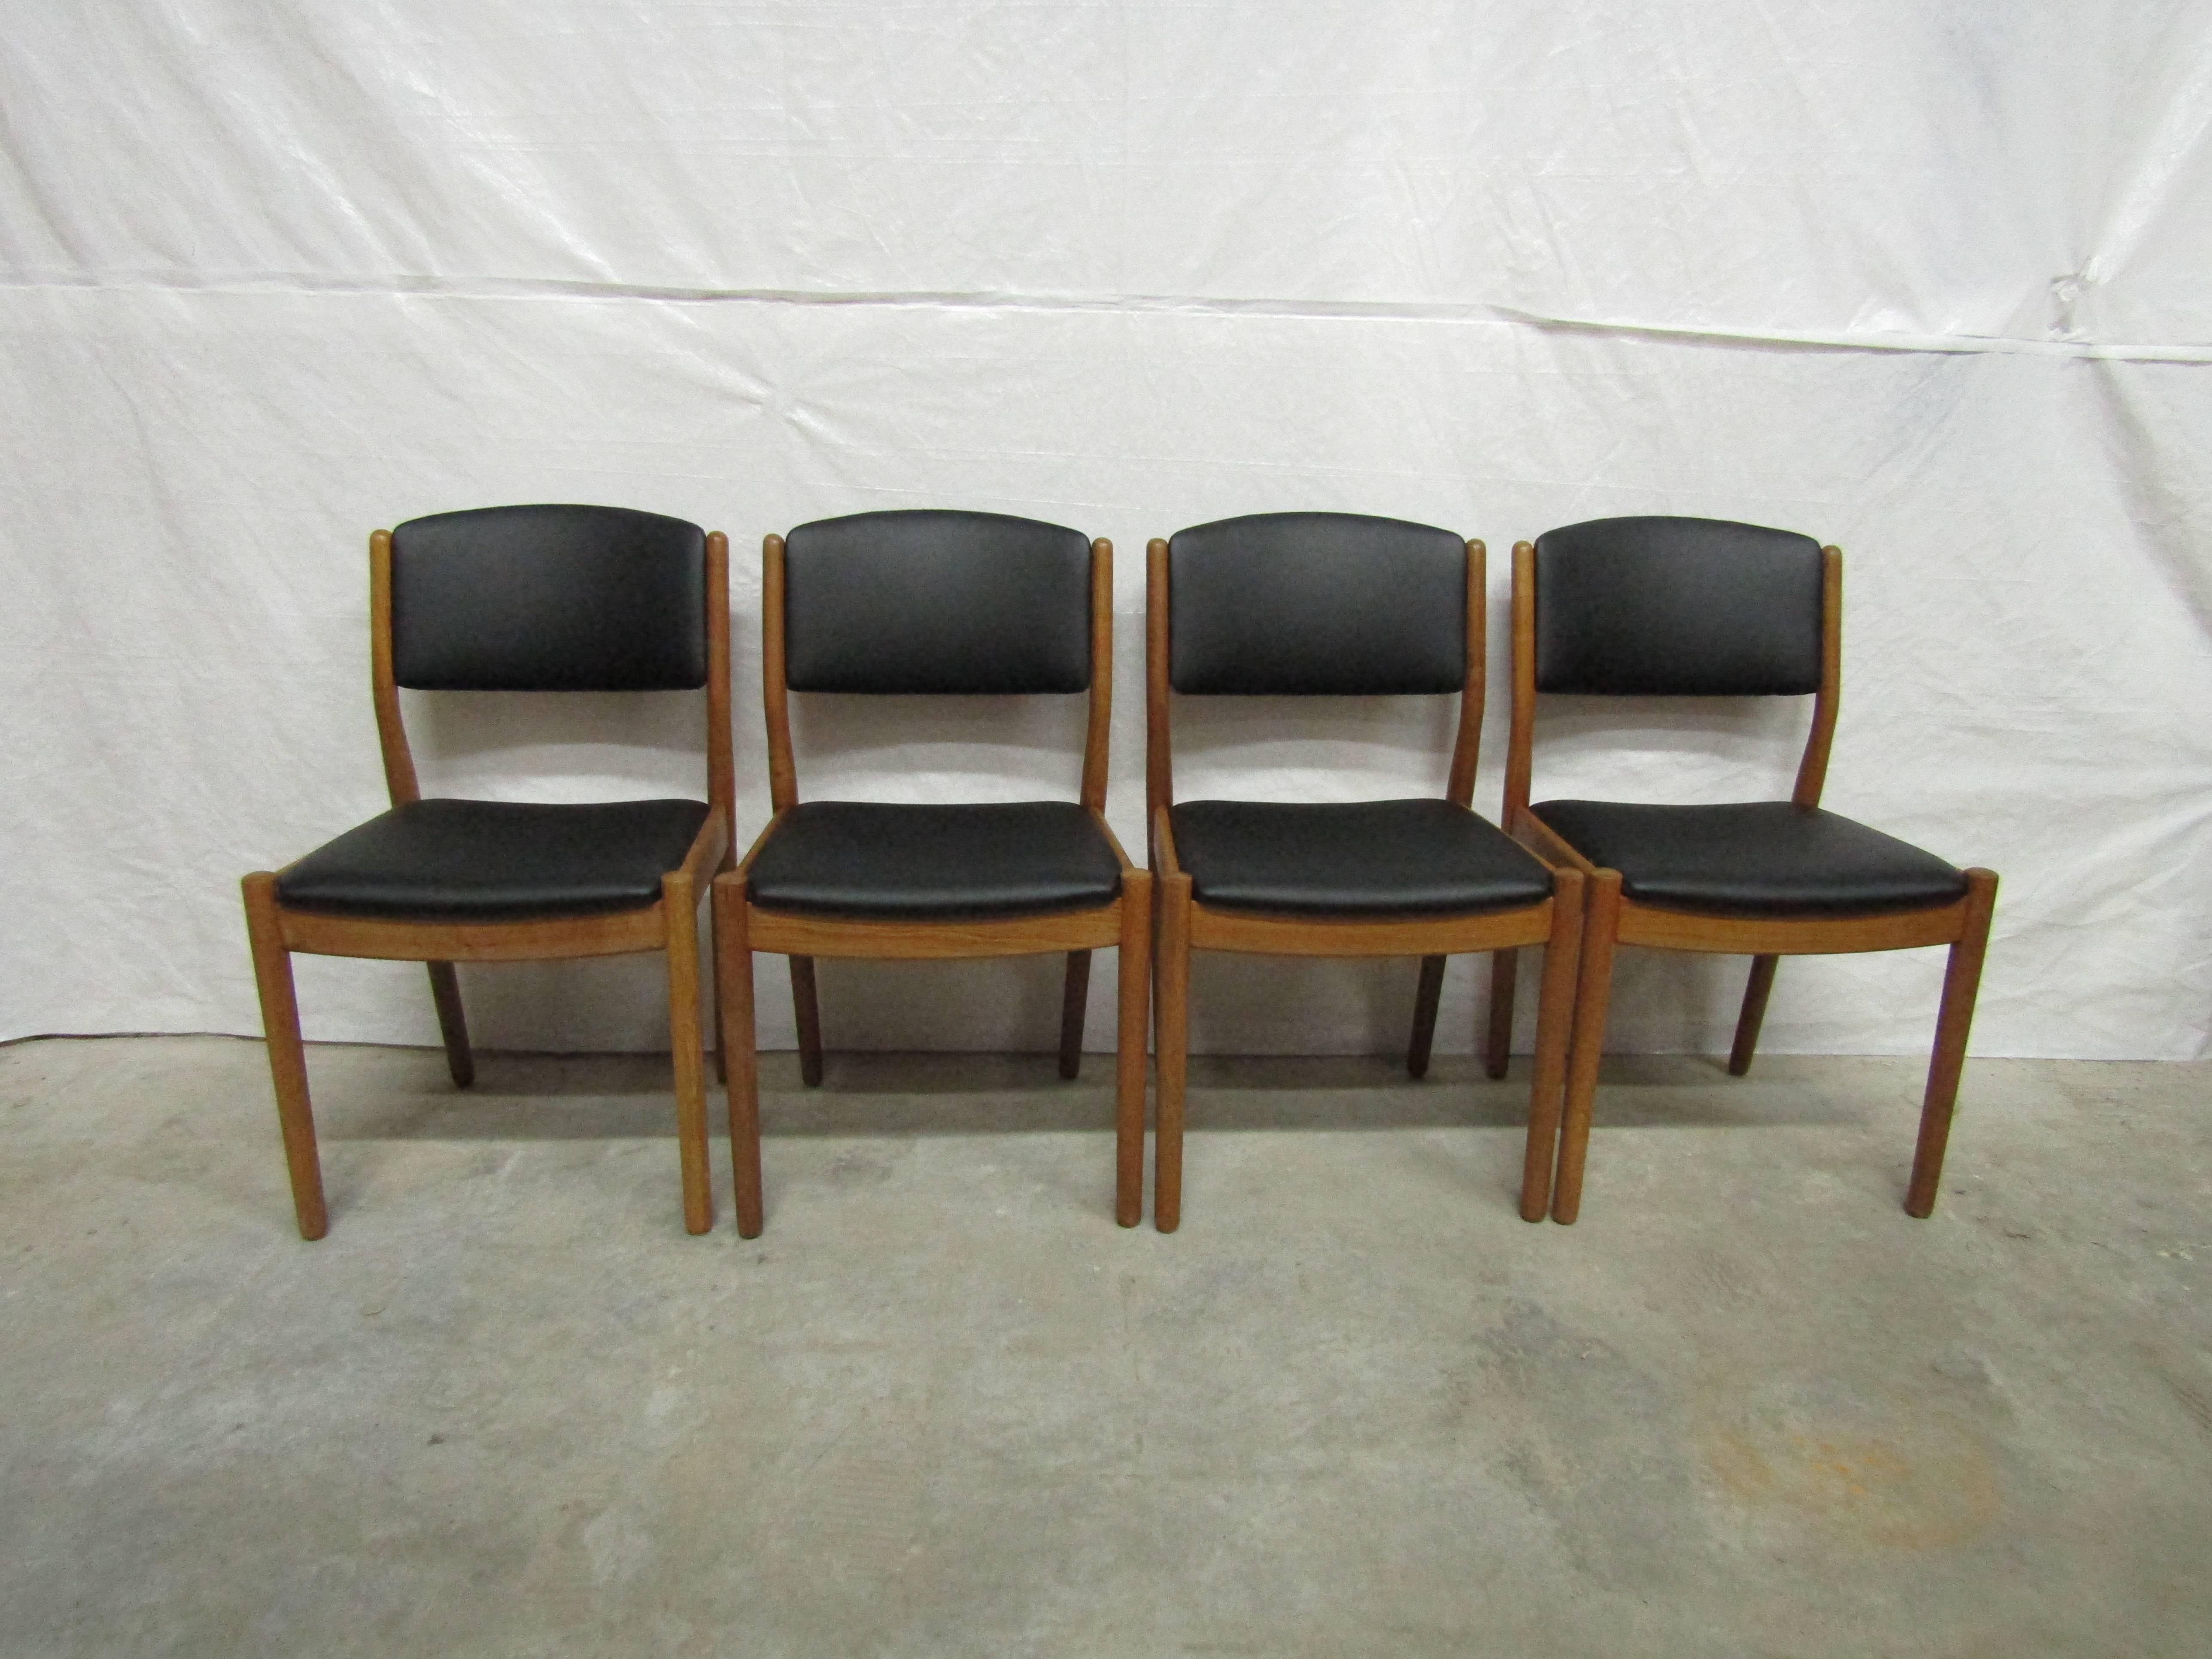 Scandinavian Classic set of four Poul Volther J61 chairs in oak and leather.